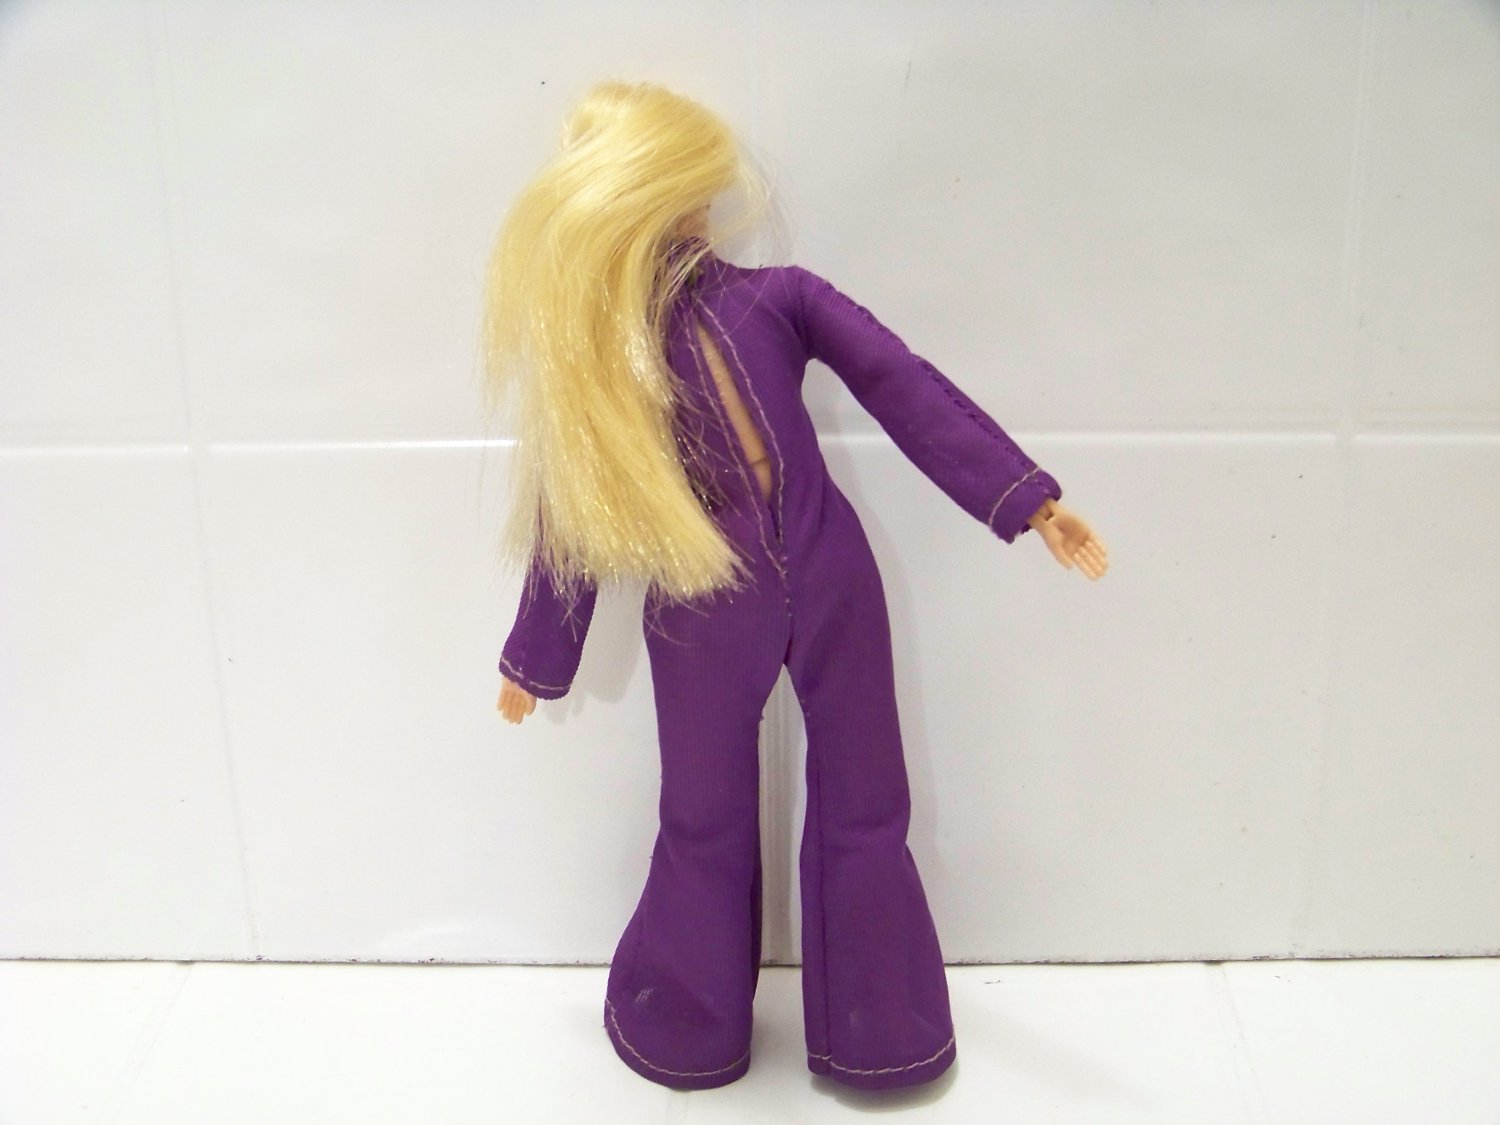 Vintage Dinah Mite doll action figure toy in purple jump suit Mego 1972